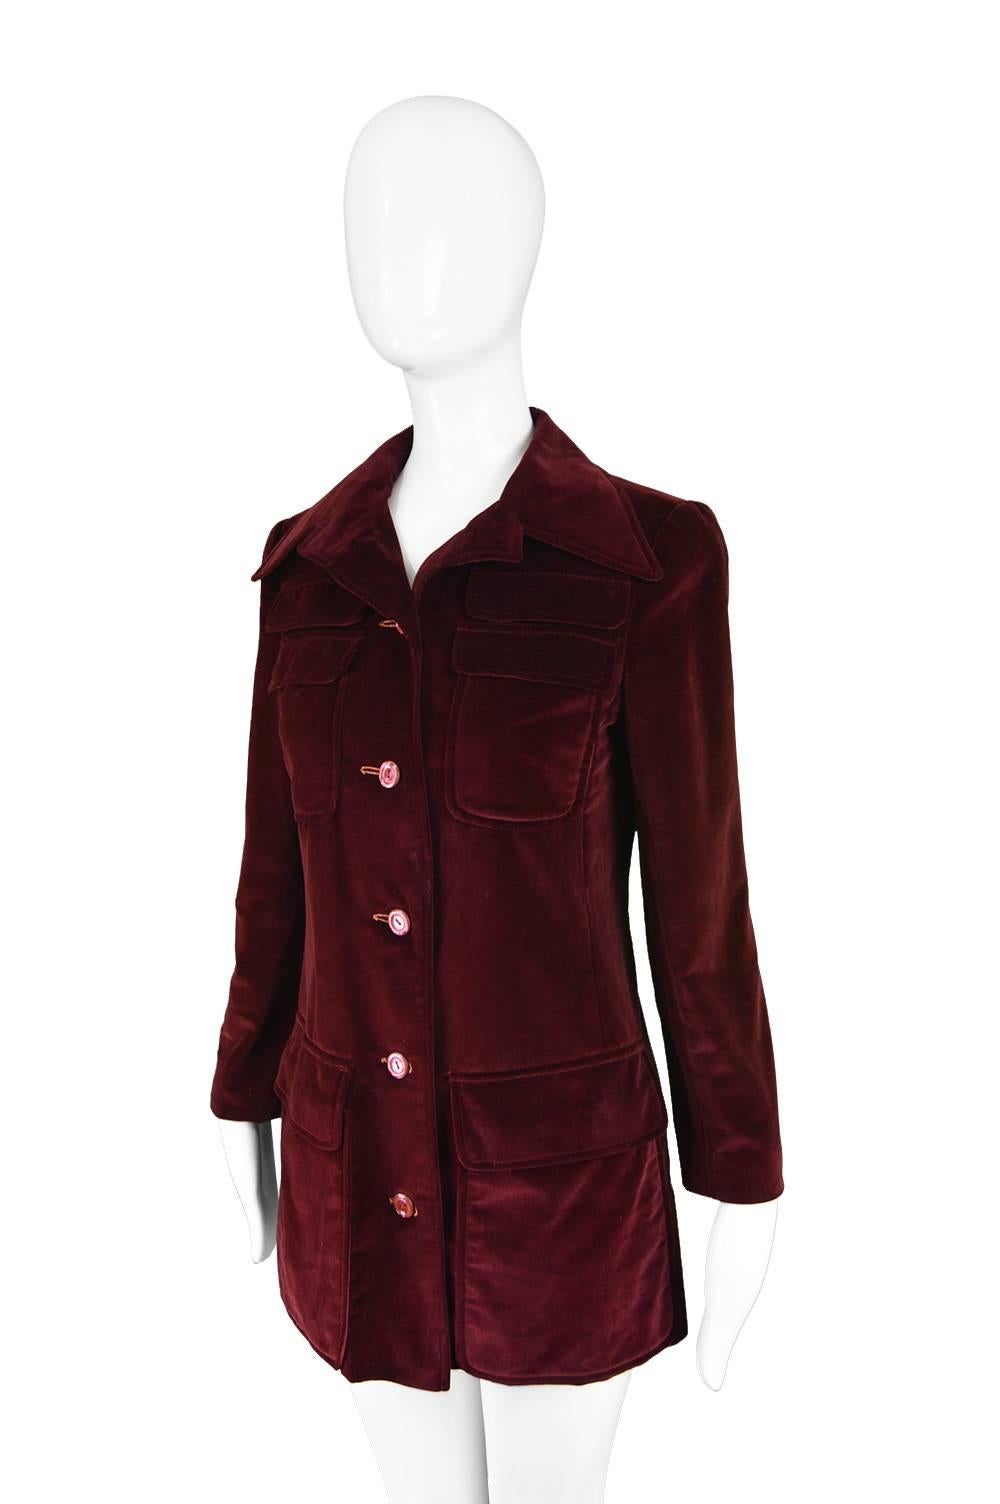 Early Calvin Klein Vintage 1970s Dark Red Velvet Dagger Collar Mod Jacket In Excellent Condition For Sale In Doncaster, South Yorkshire